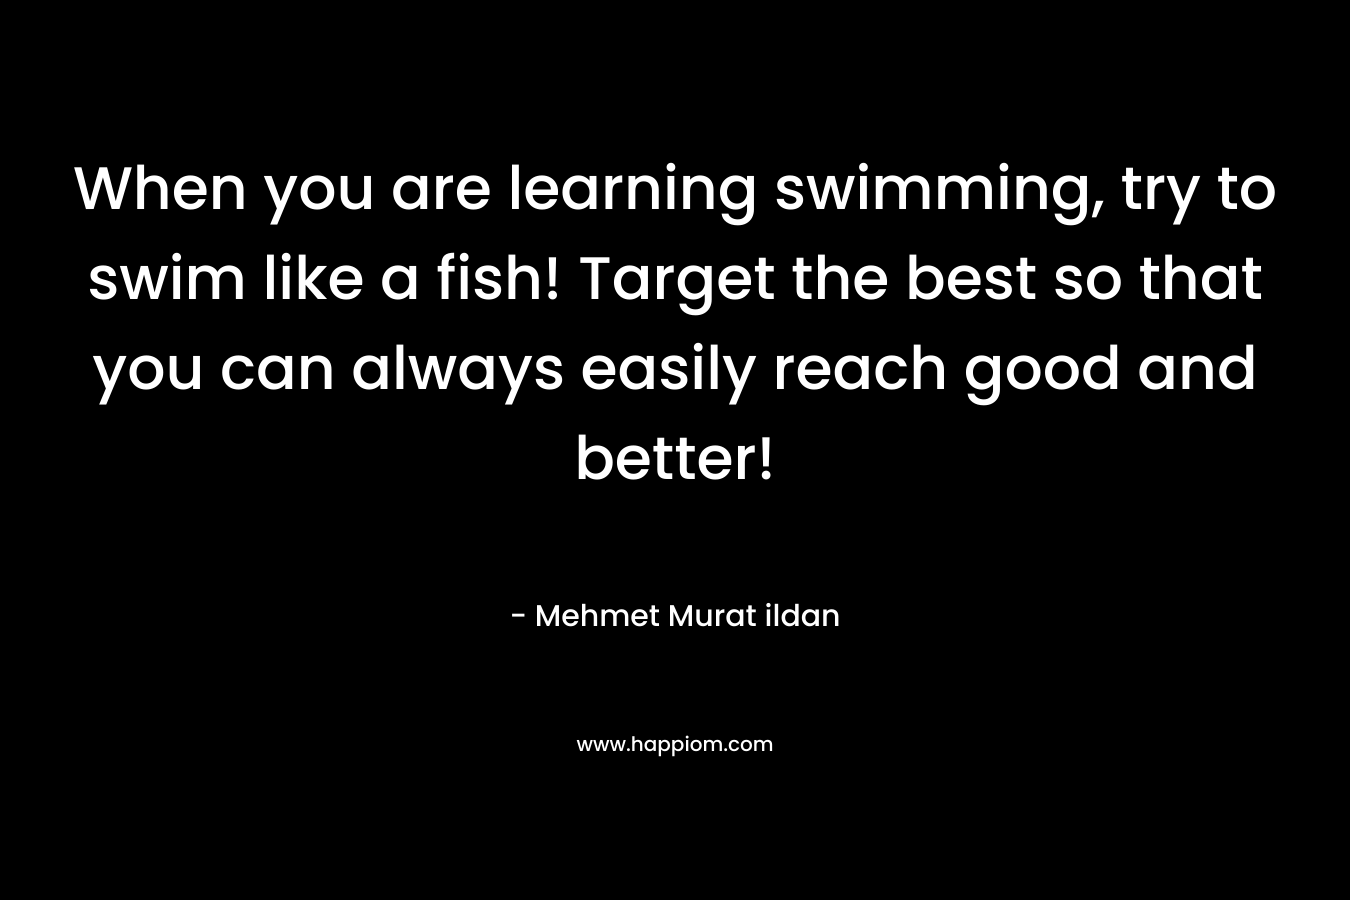 When you are learning swimming, try to swim like a fish! Target the best so that you can always easily reach good and better!